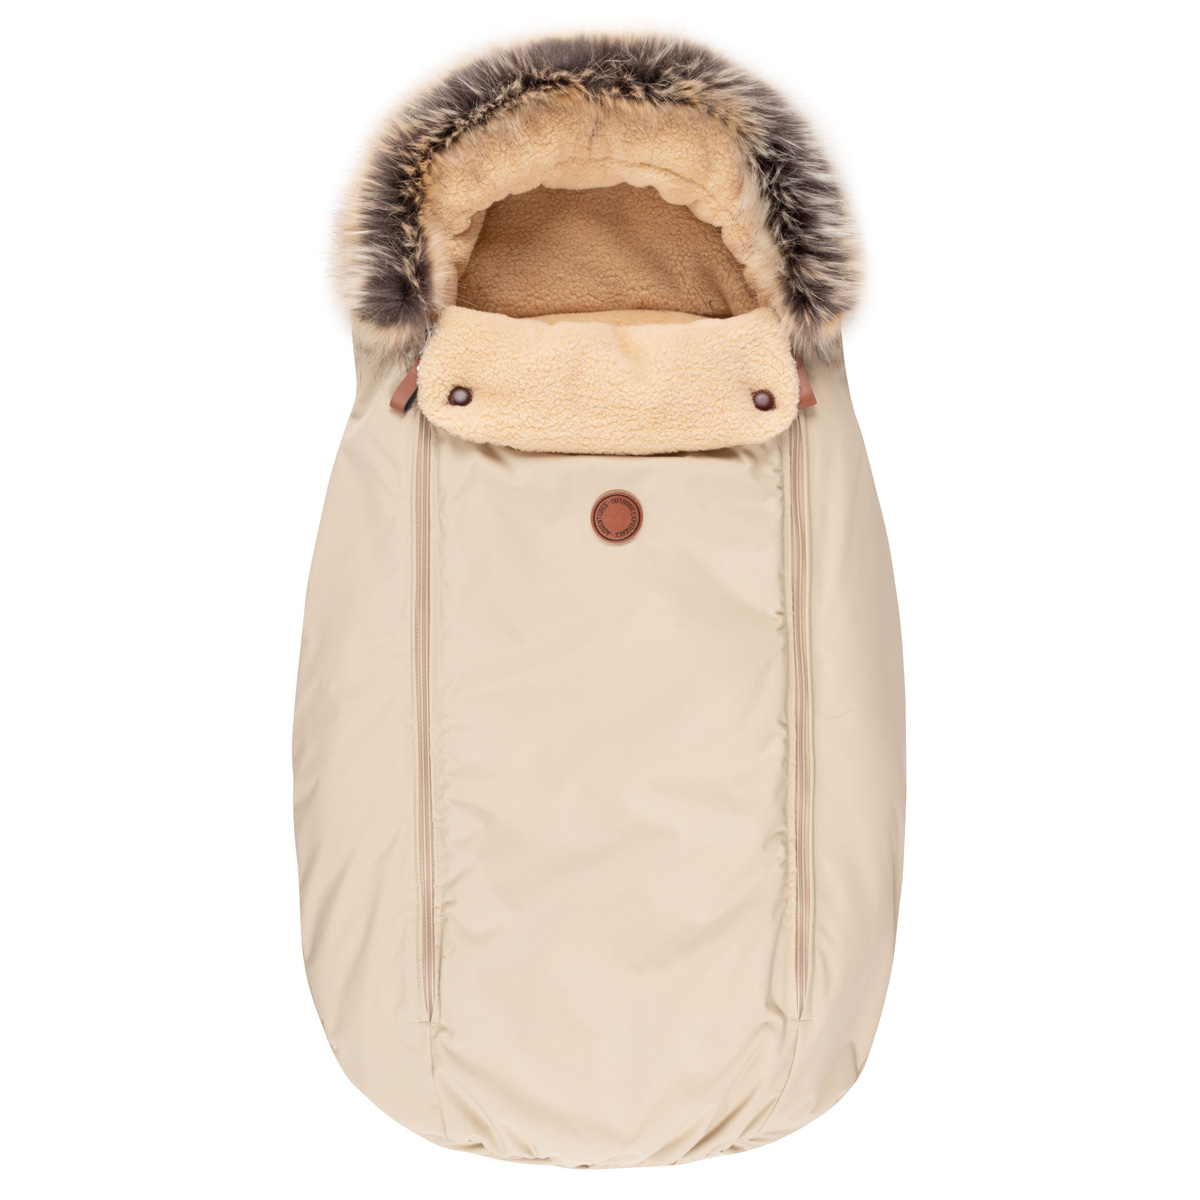 Winter sleeping bag with cotton fur lining - Lenne